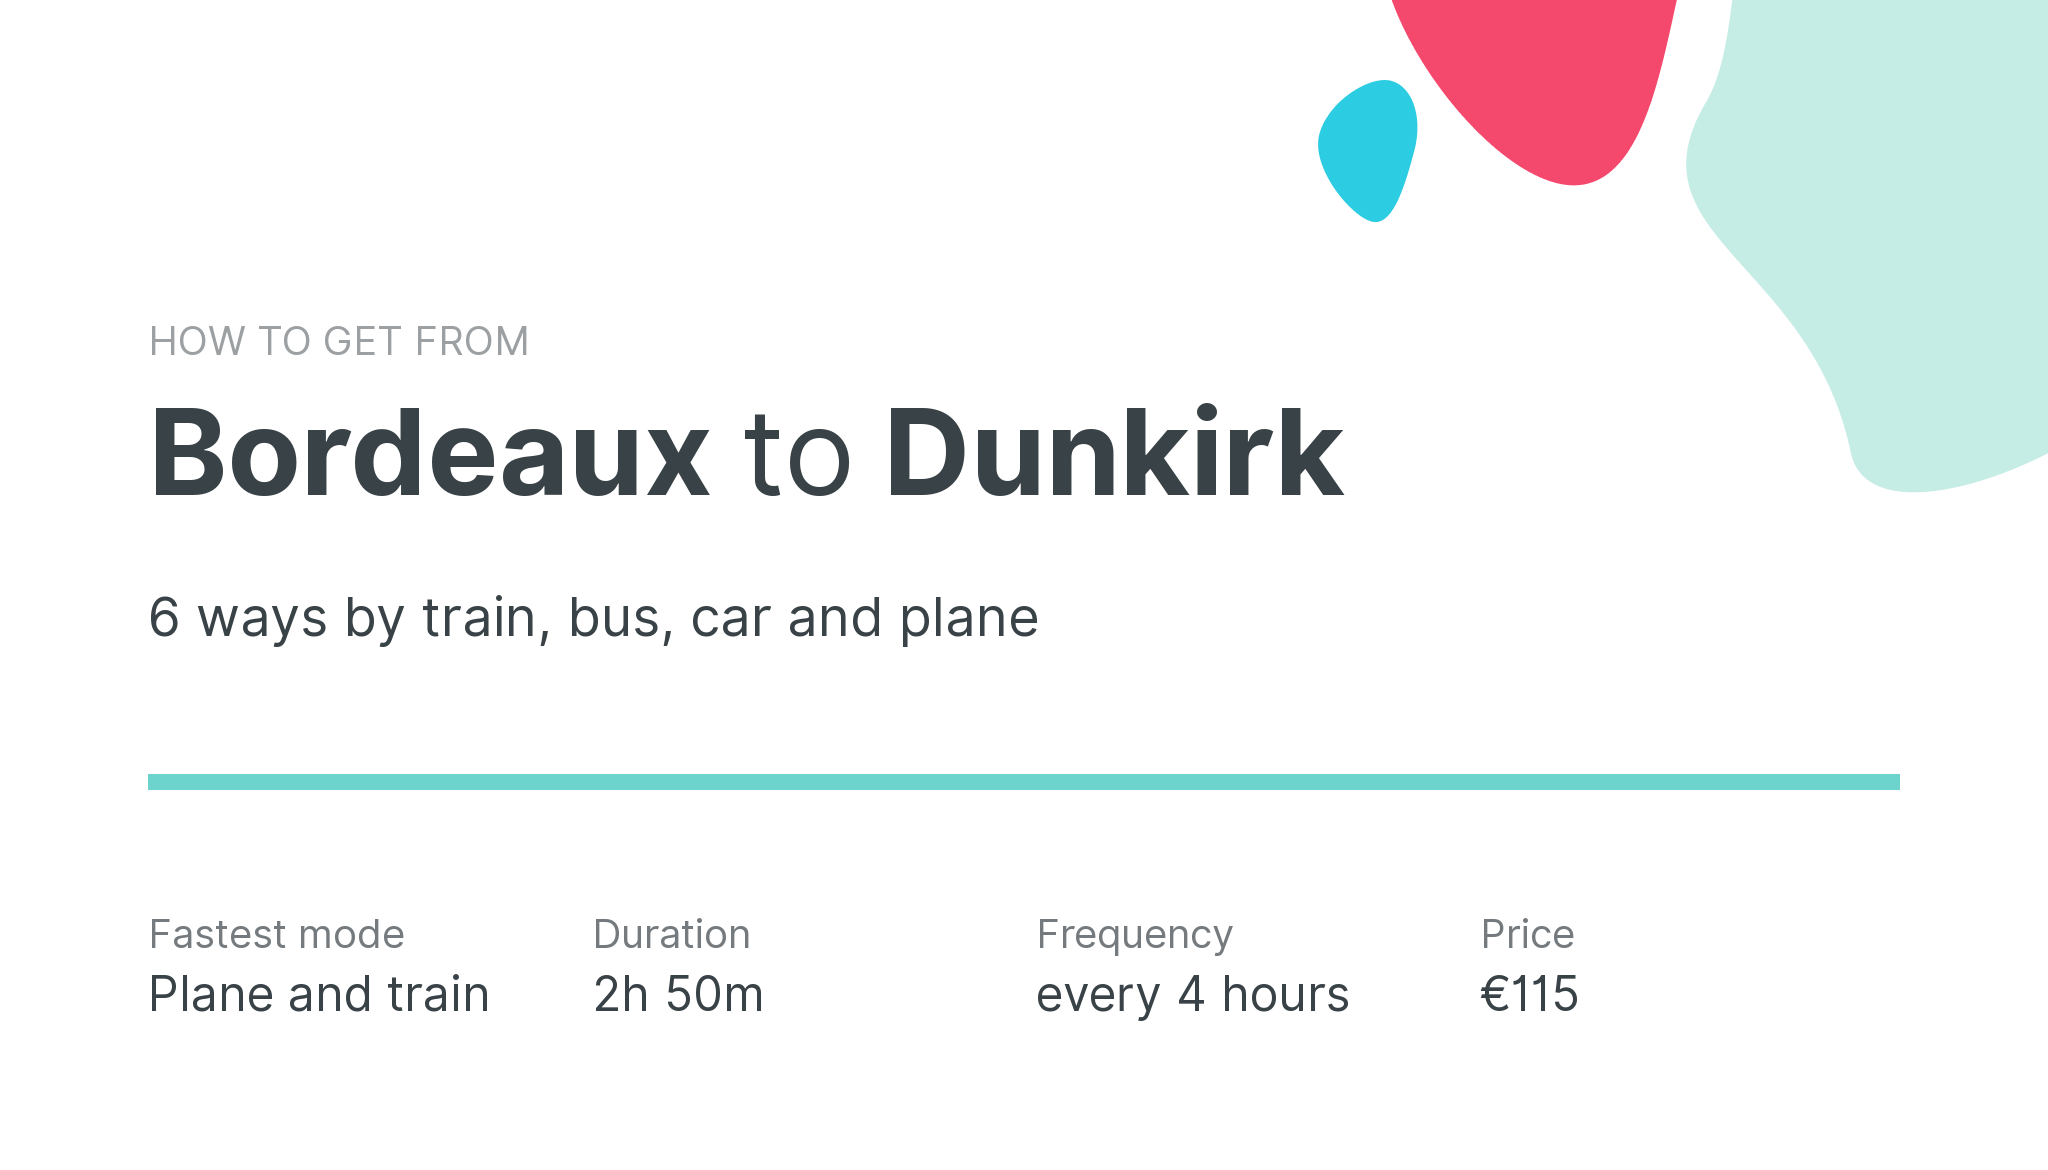 How do I get from Bordeaux to Dunkirk